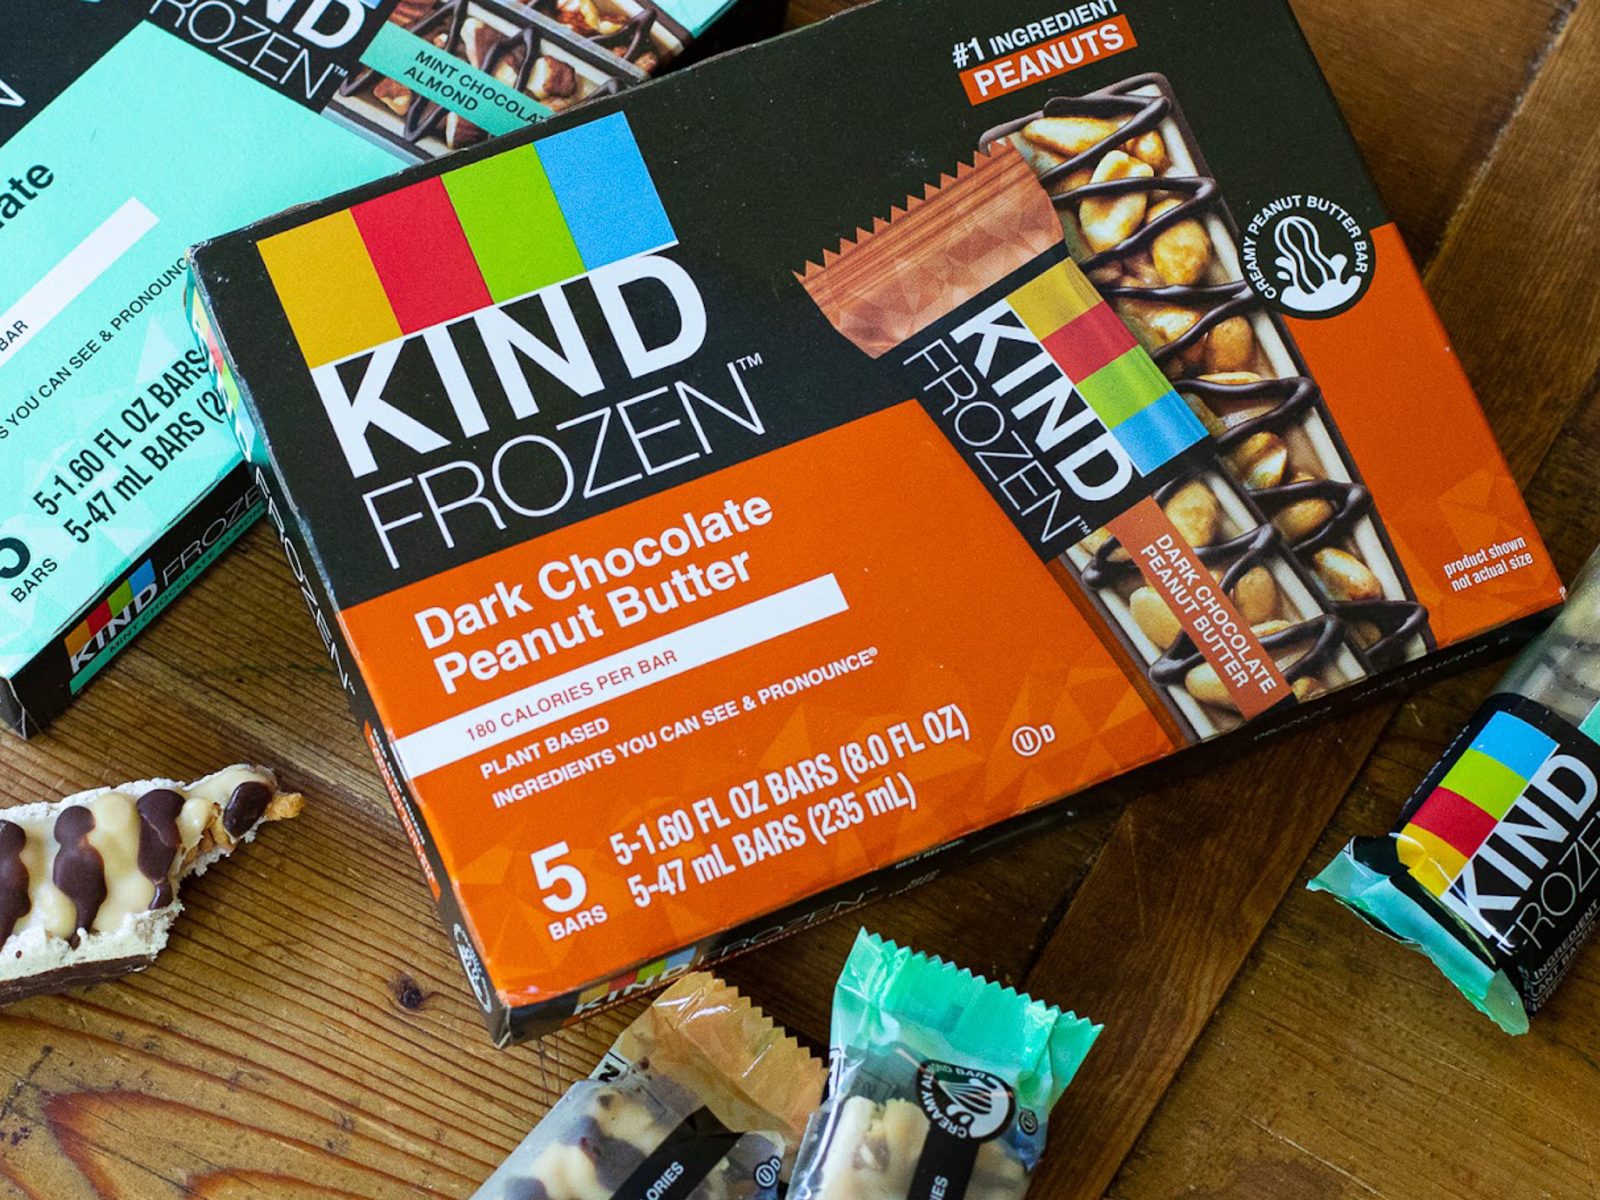 Kind Frozen Bars As Low As $1.49 At Kroger